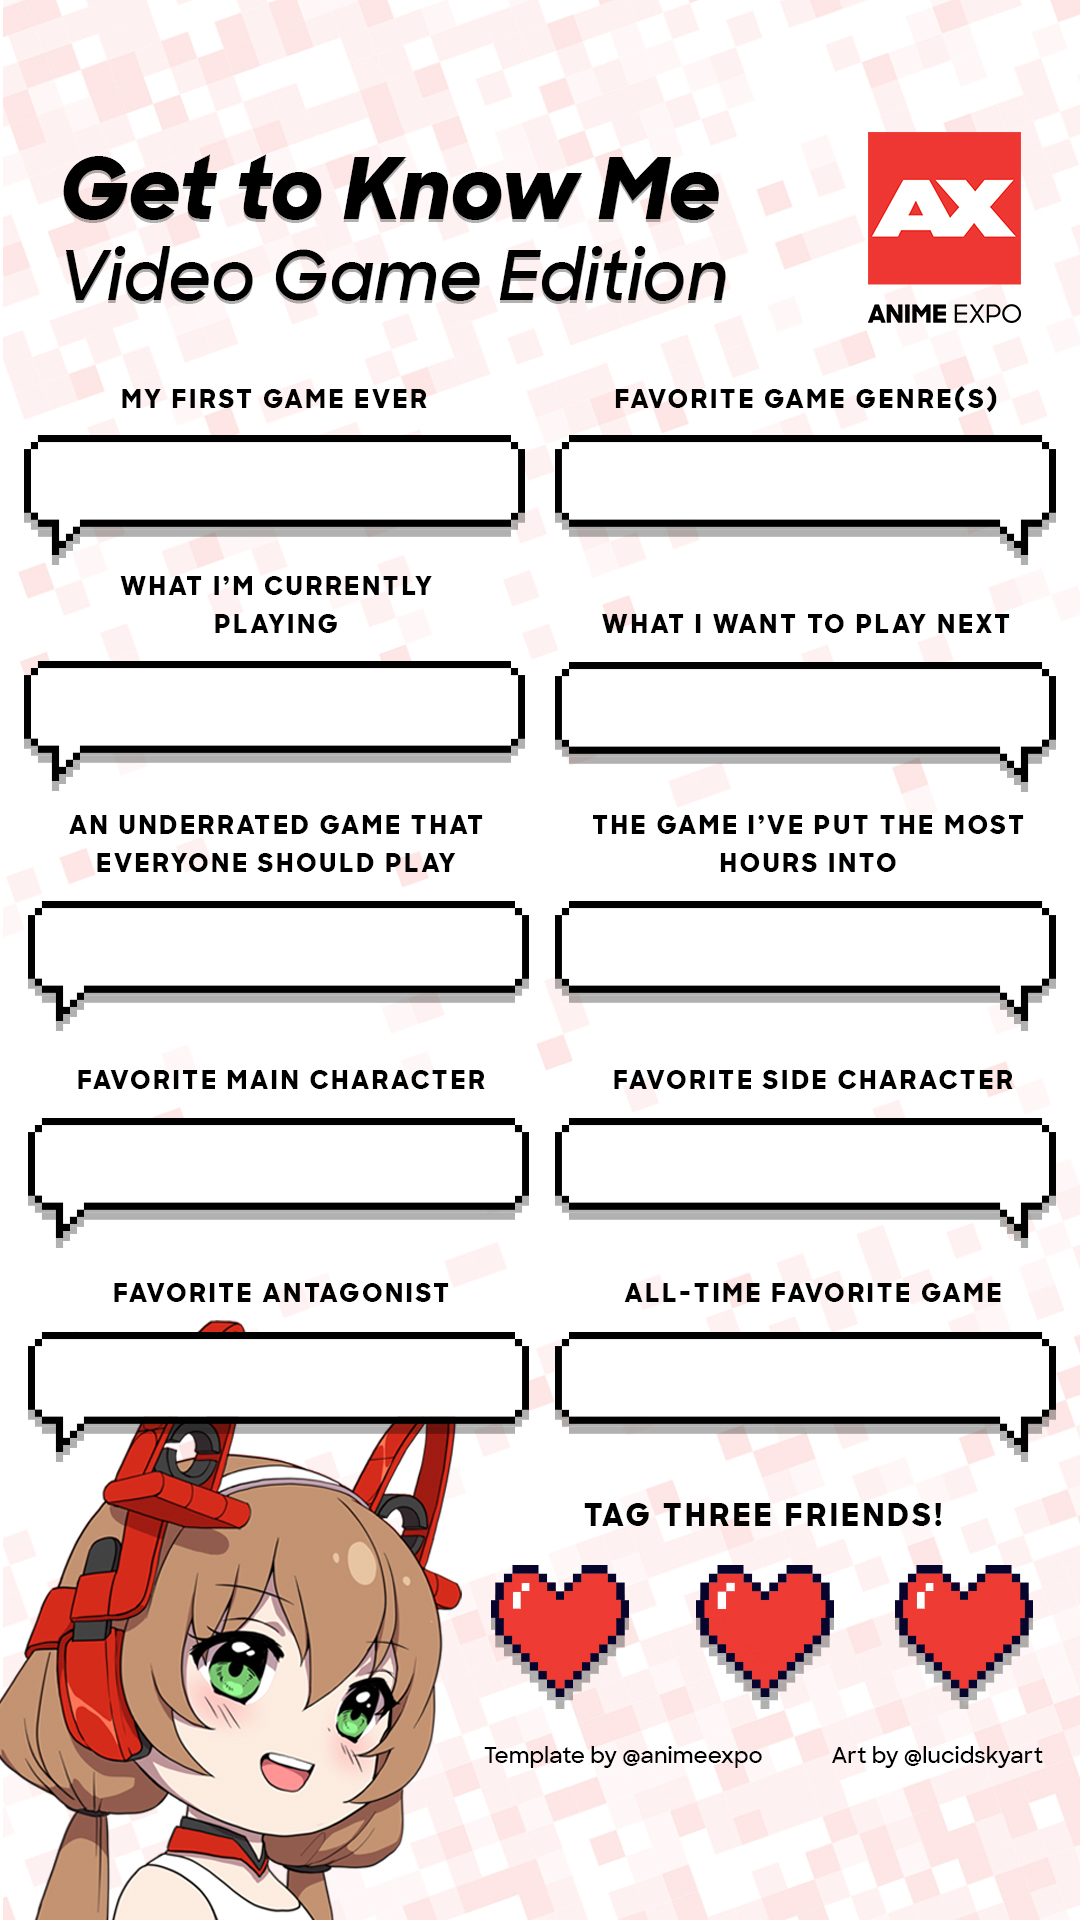 Get to Know Me - Video Game Edition - Anime Expo